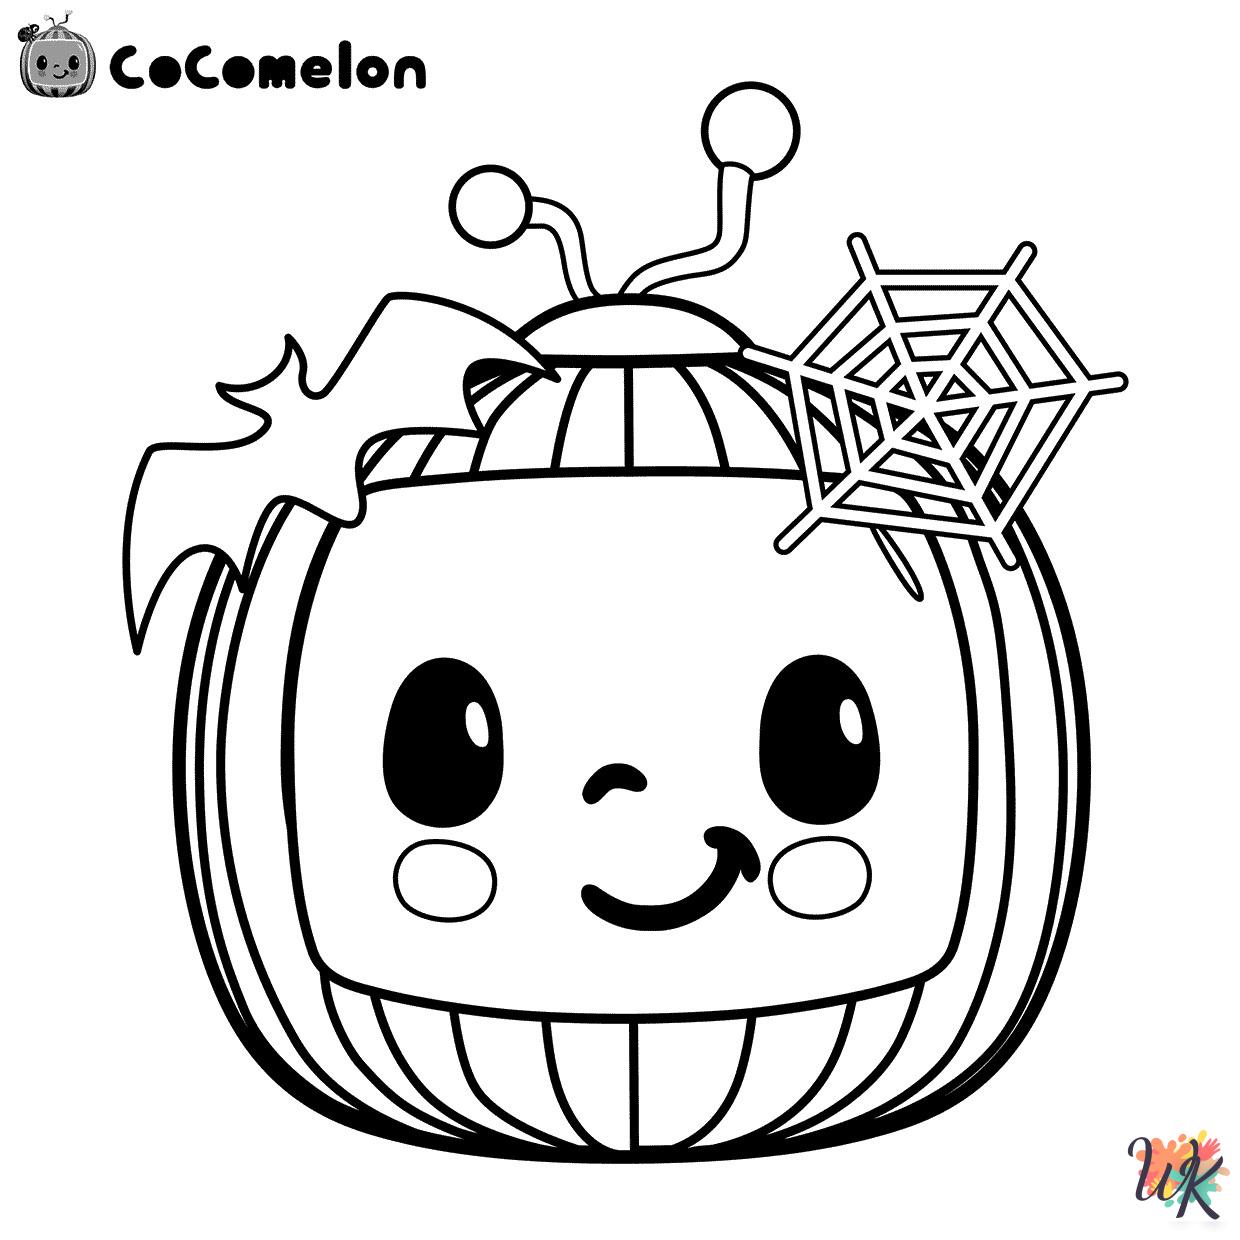 Coelon coloring pages by coloringpageswk on